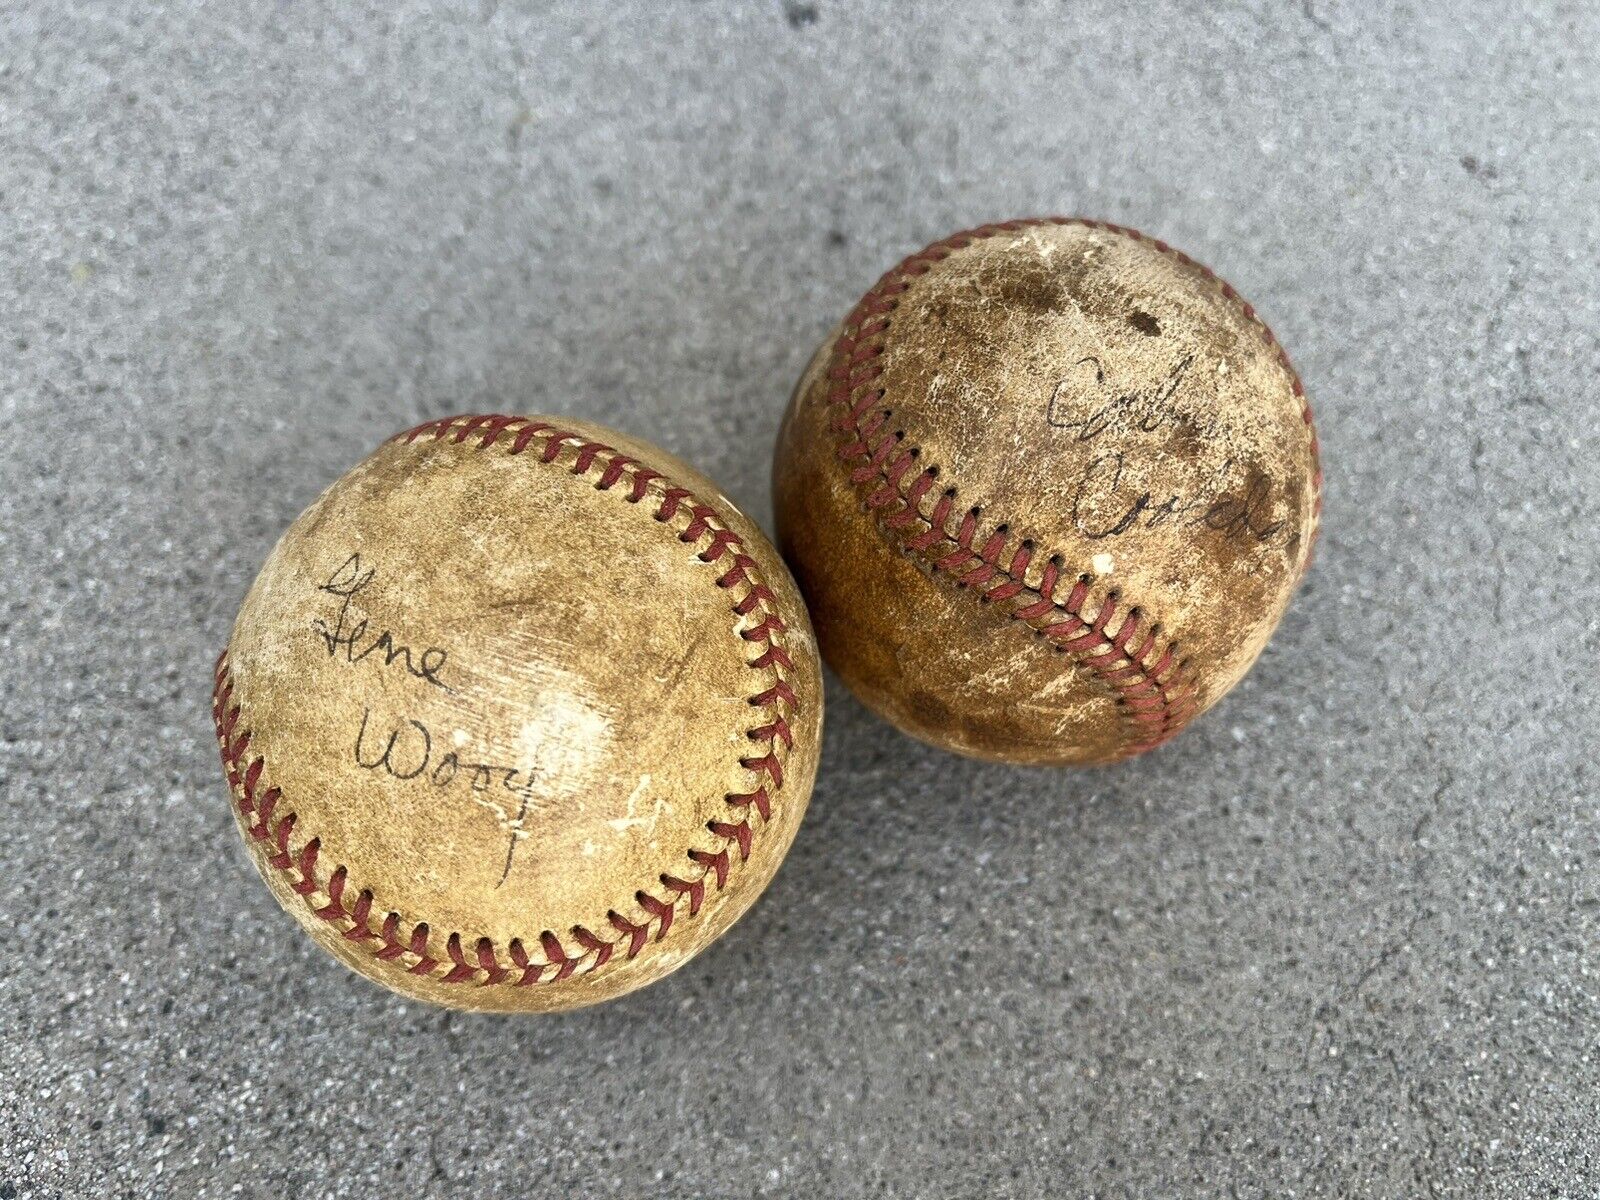 2 Vintage baseballs from Early 1900s - No pulled stitches